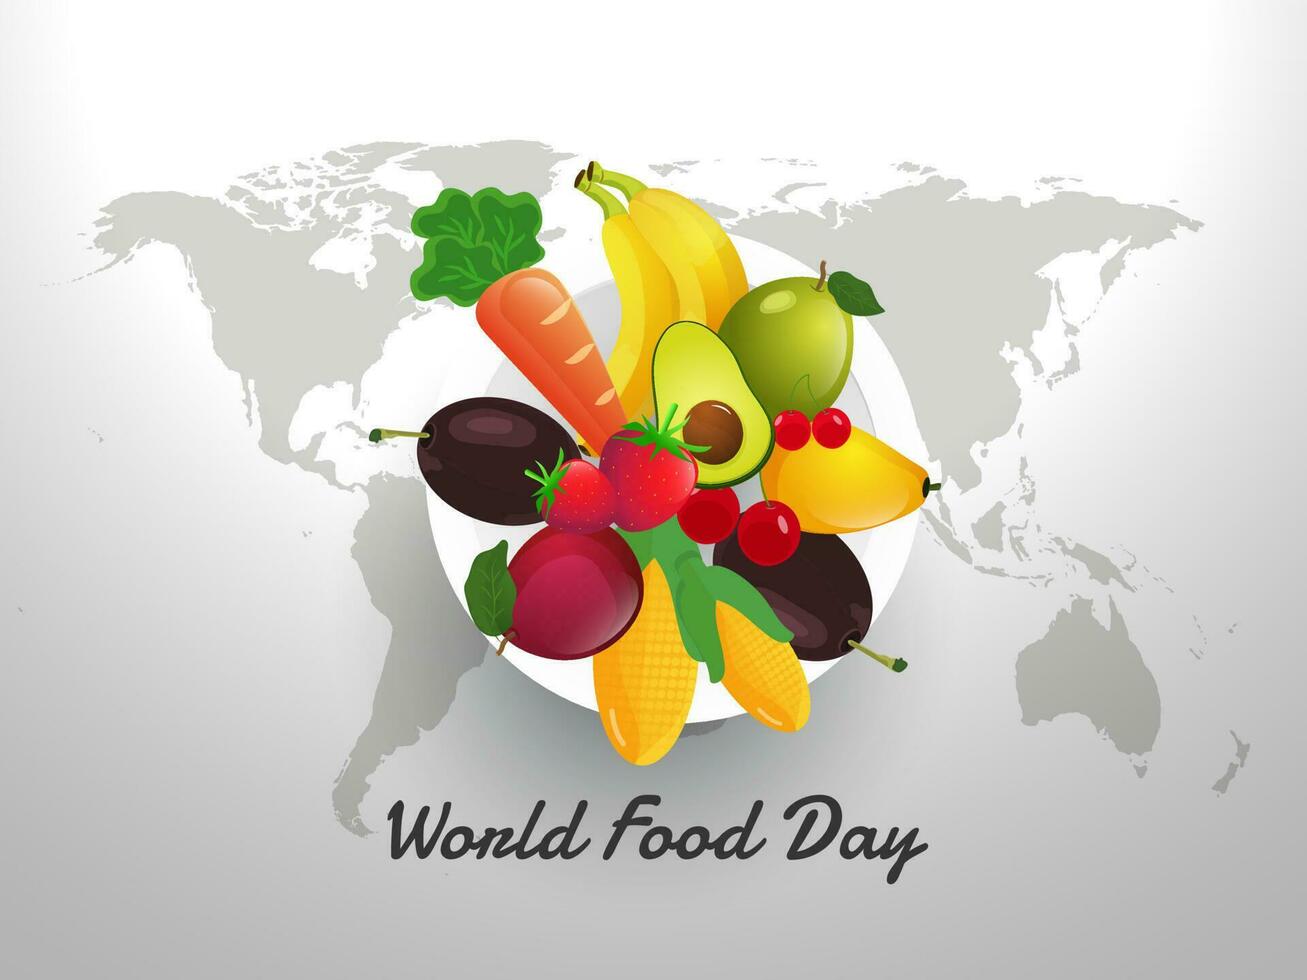 Top view of fruits with corn and carrot on plate with white world map background for World Food Day concept. vector